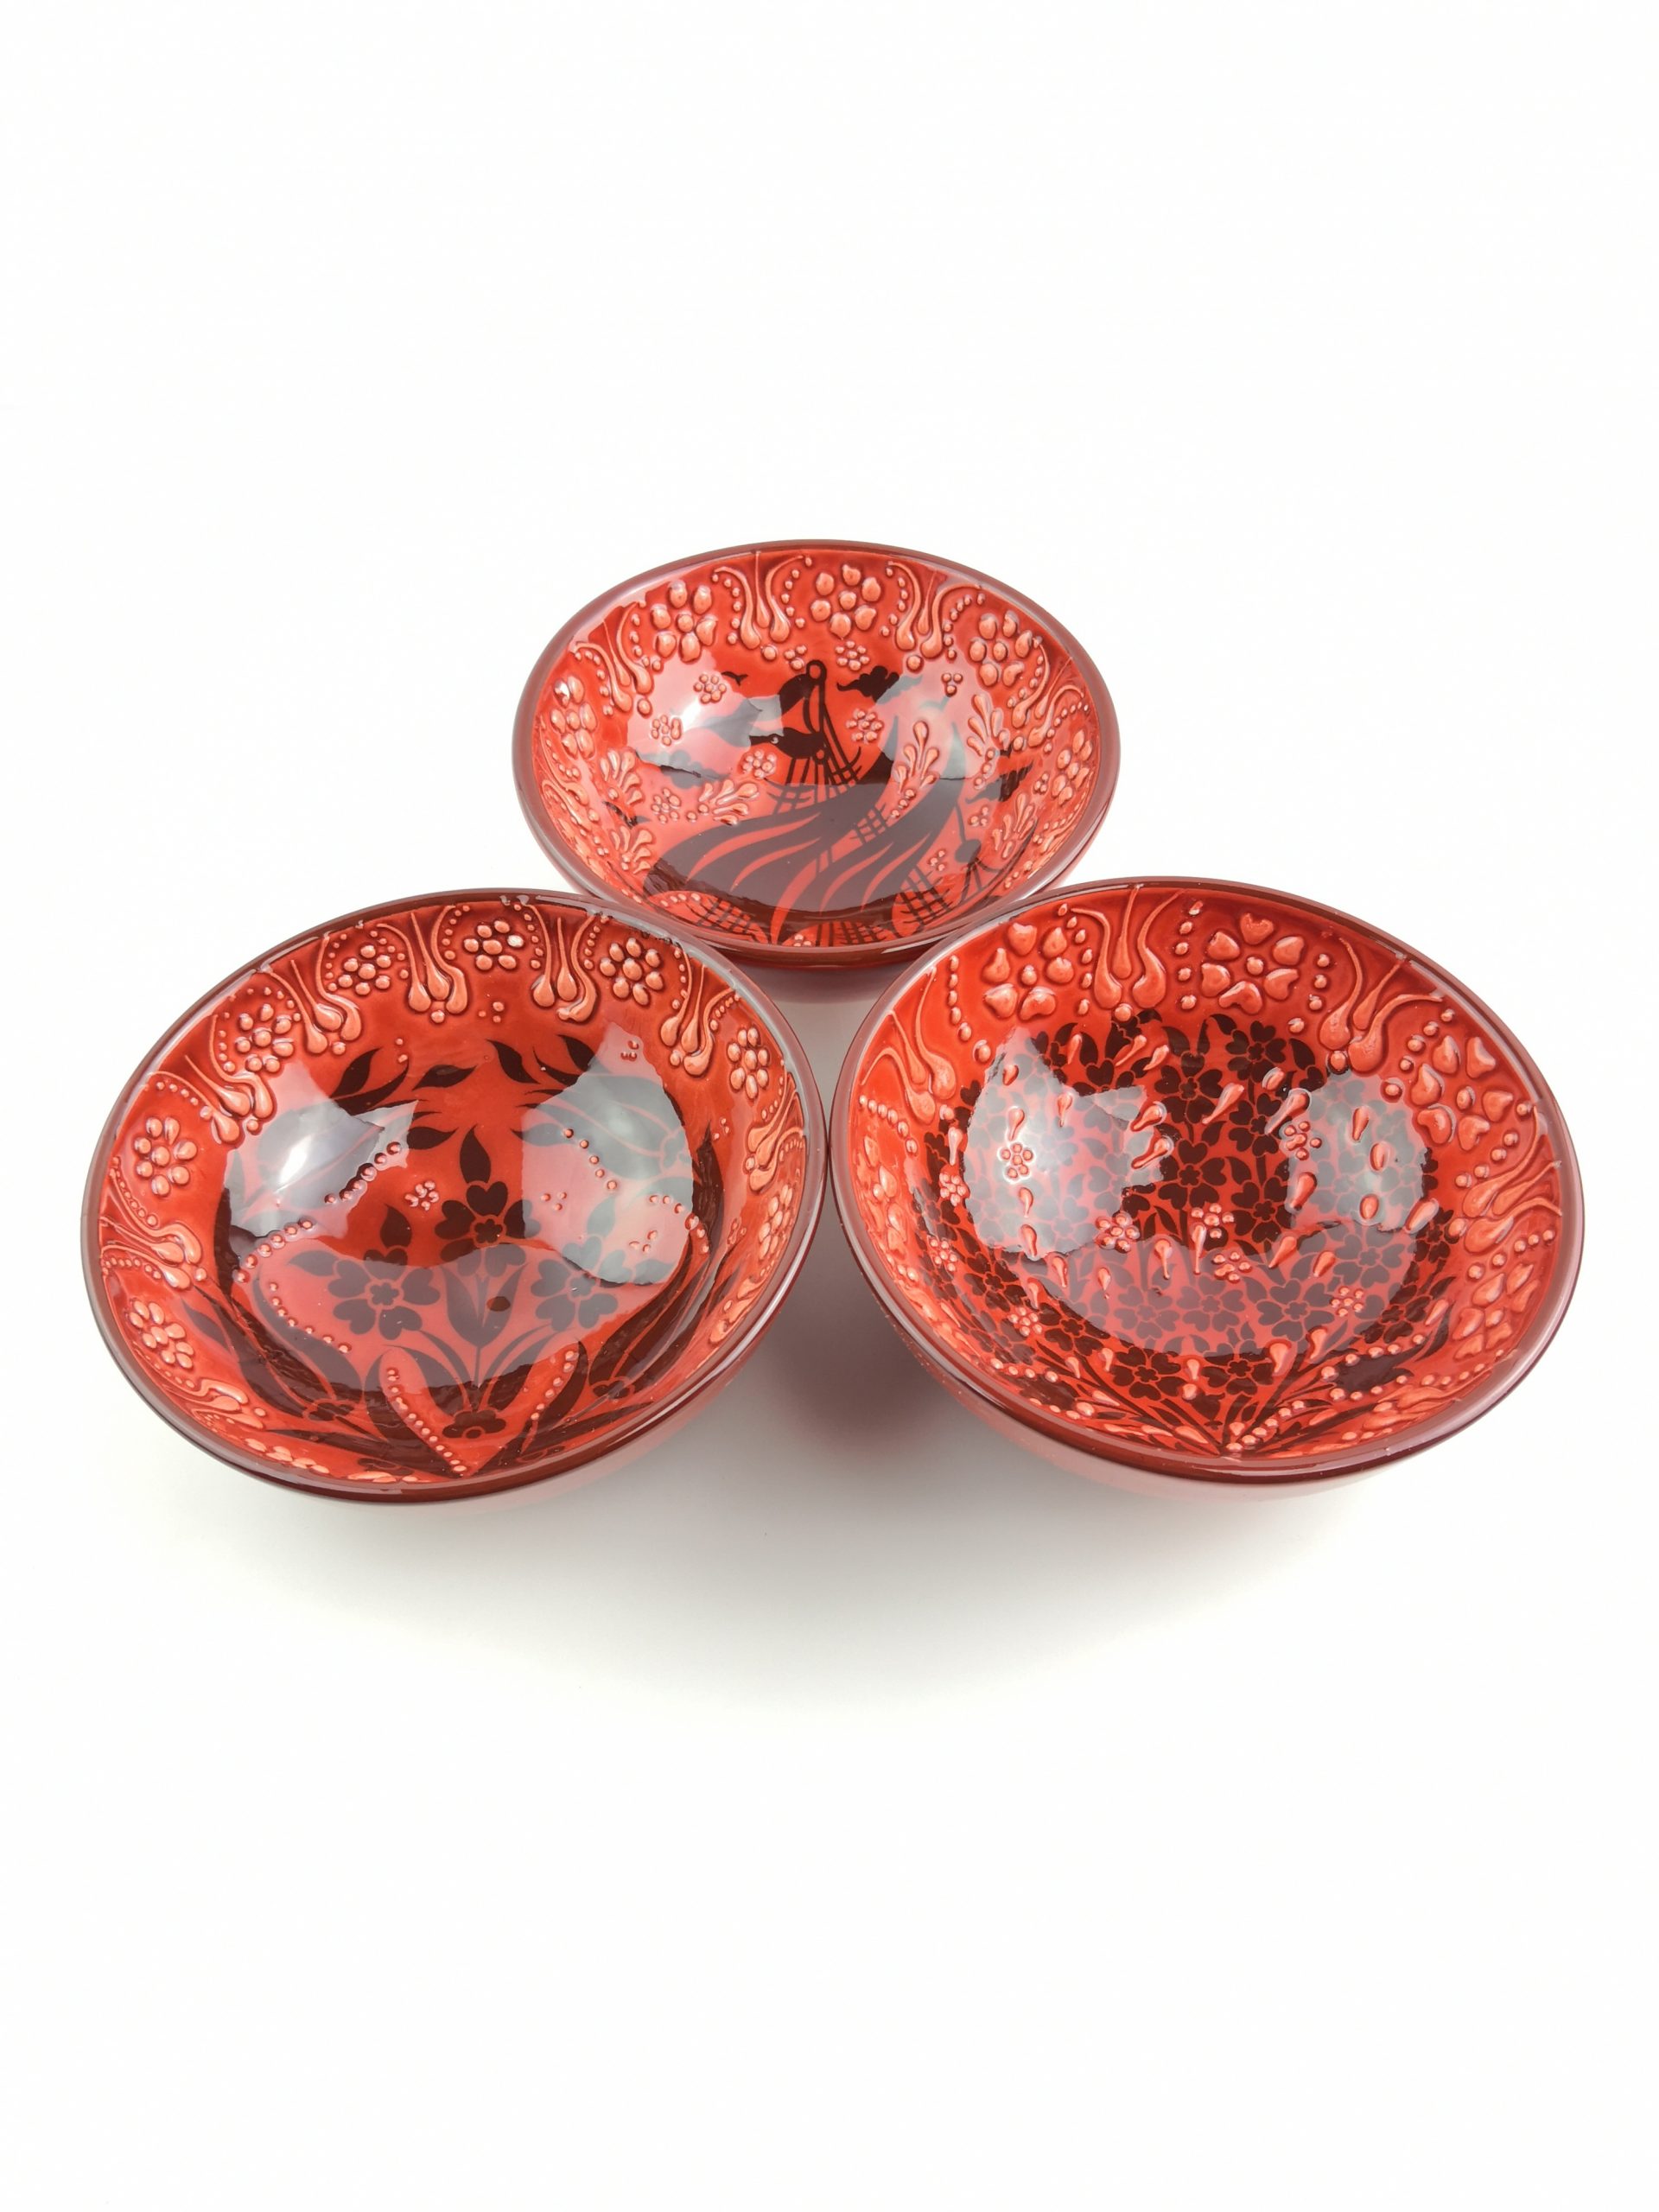 Hand Painted Ceramic Bowls(12 cm)- 3 Pieces Handmade Turkish Pottery